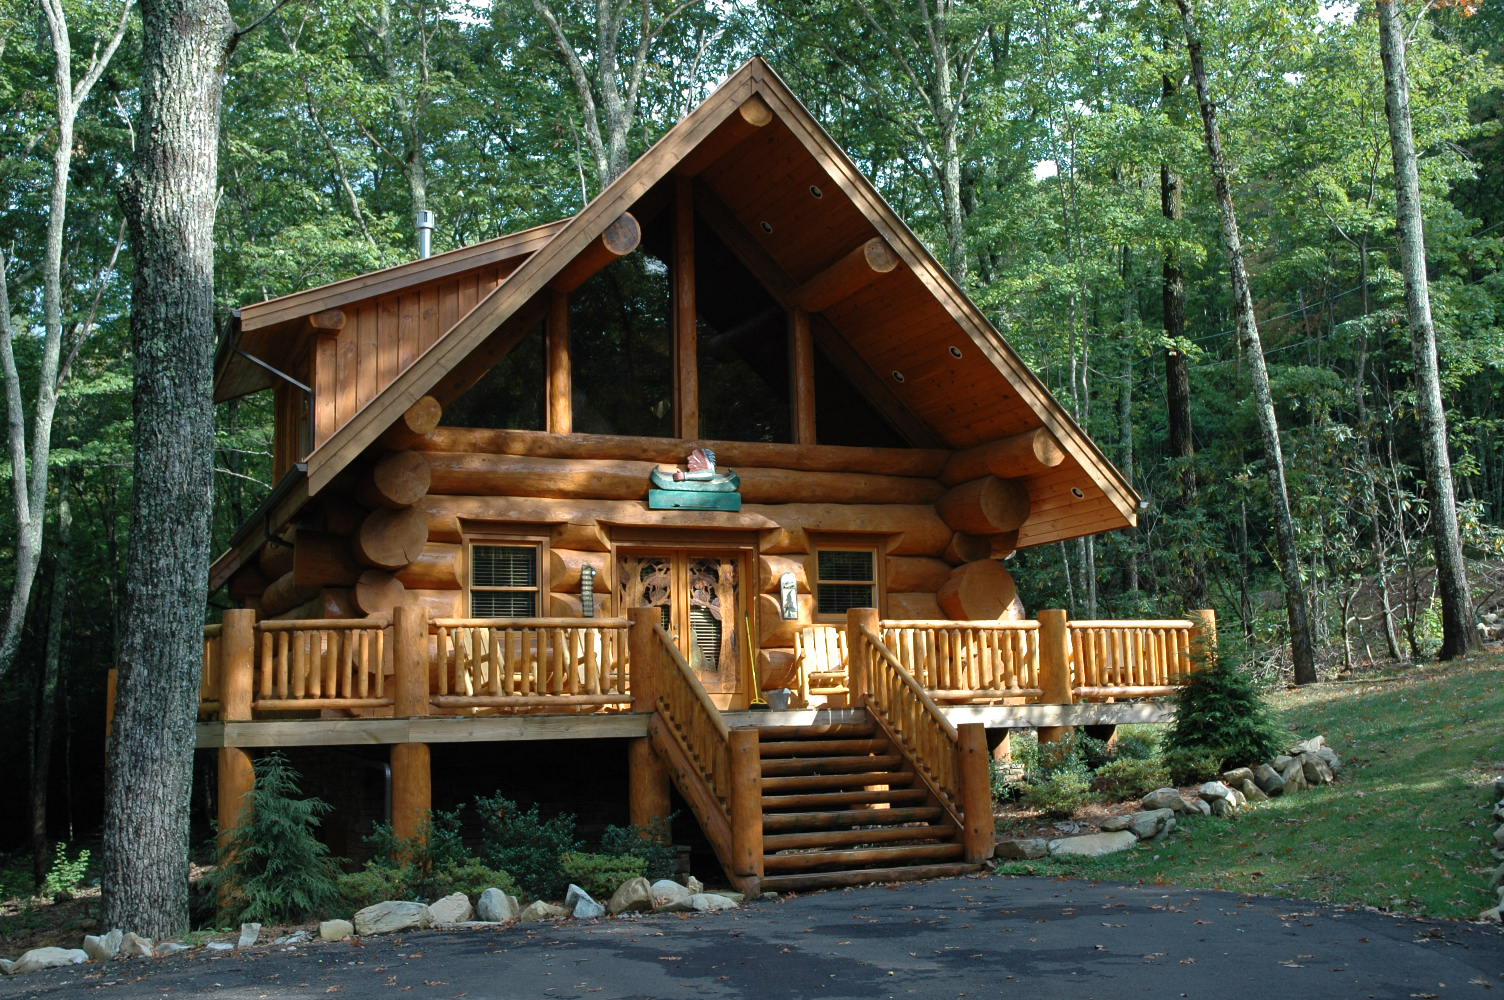 Supersized-log-cabin-that-appears-comfortable-and-secure.jpeg